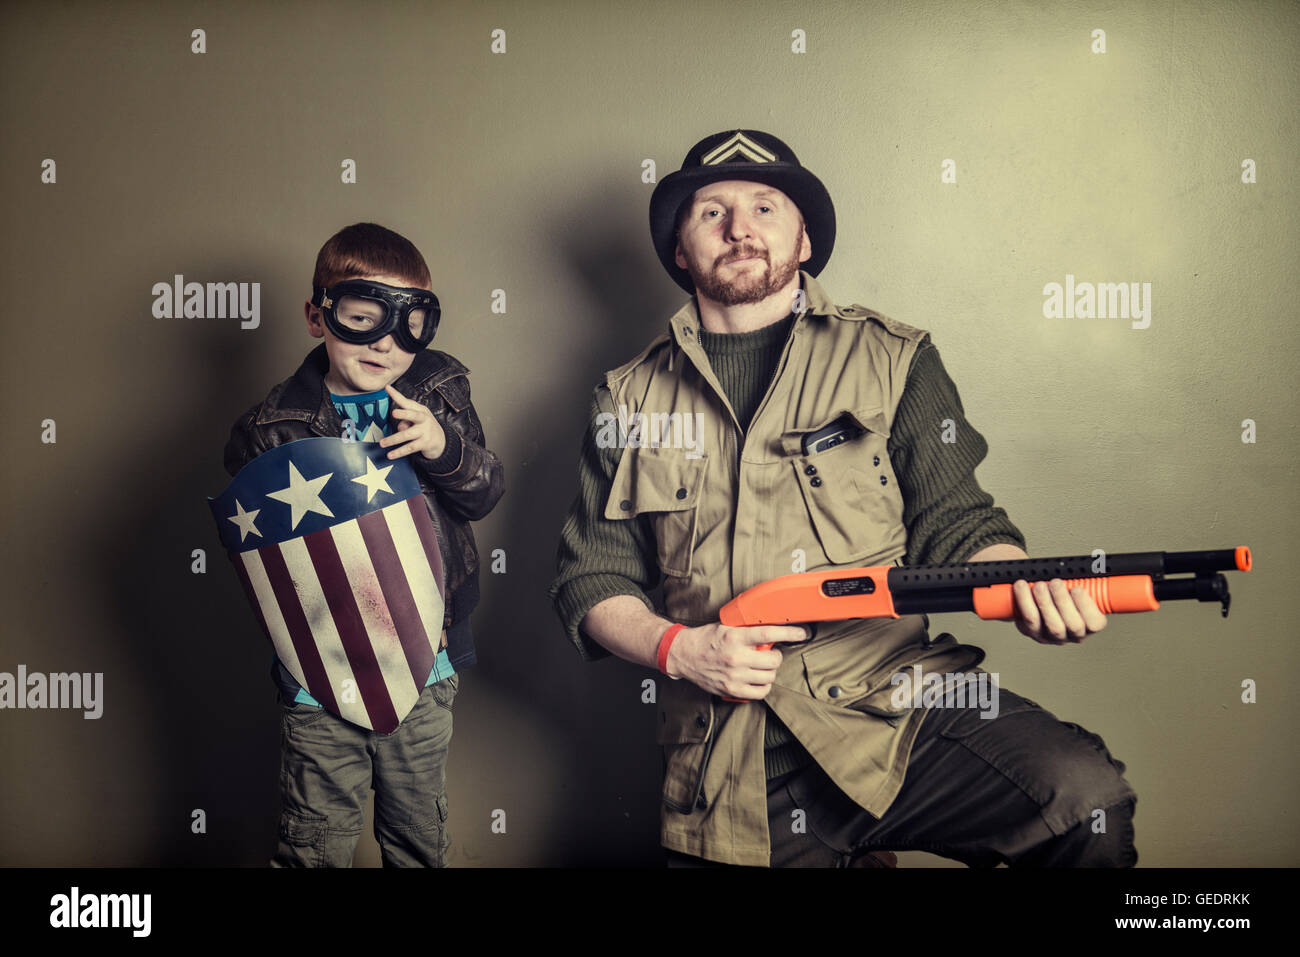 cosplayers father and son pose for photographs at a comic con convention GEDRKK